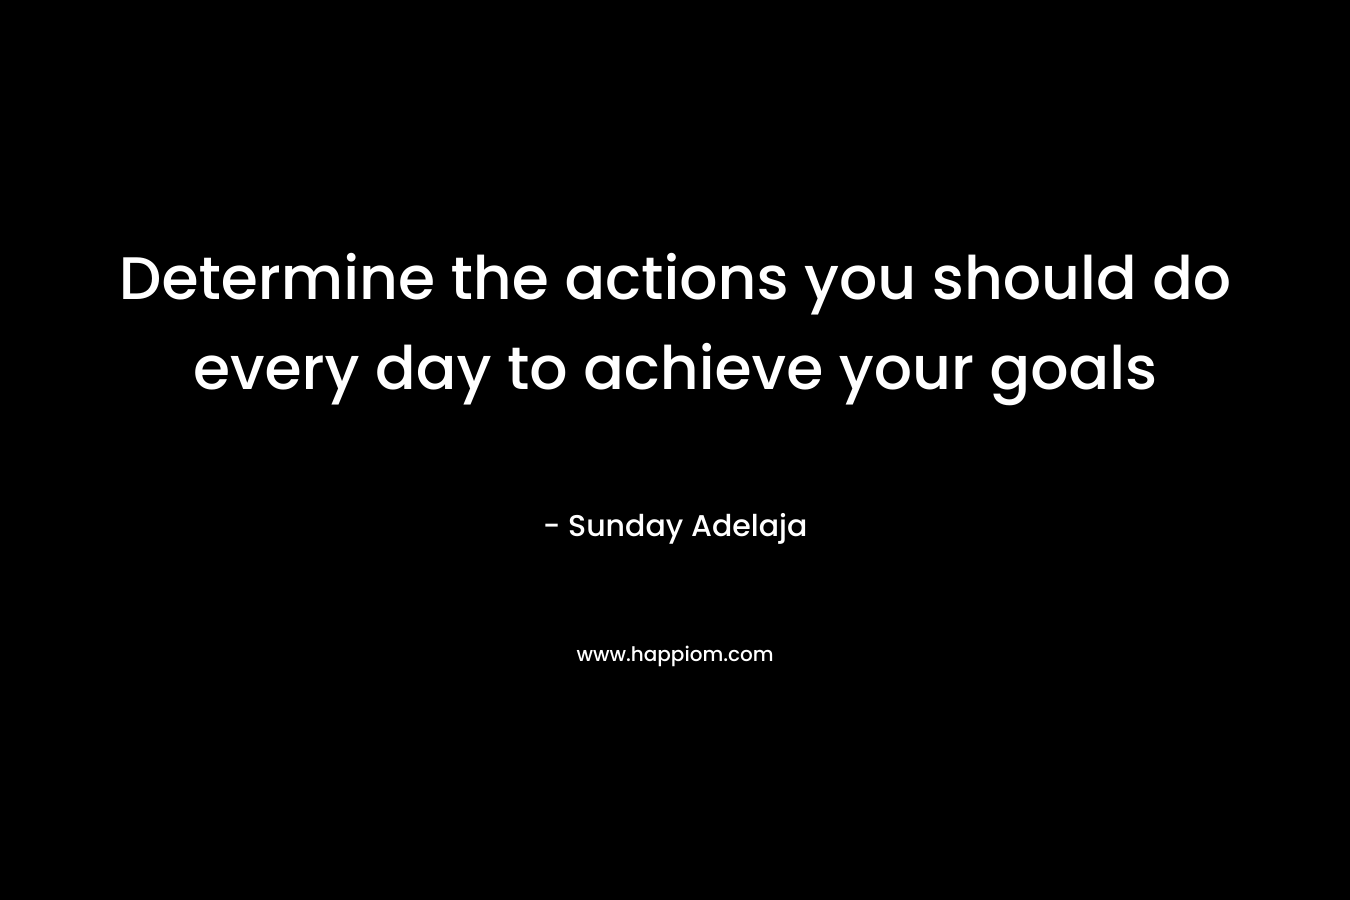 Determine the actions you should do every day to achieve your goals